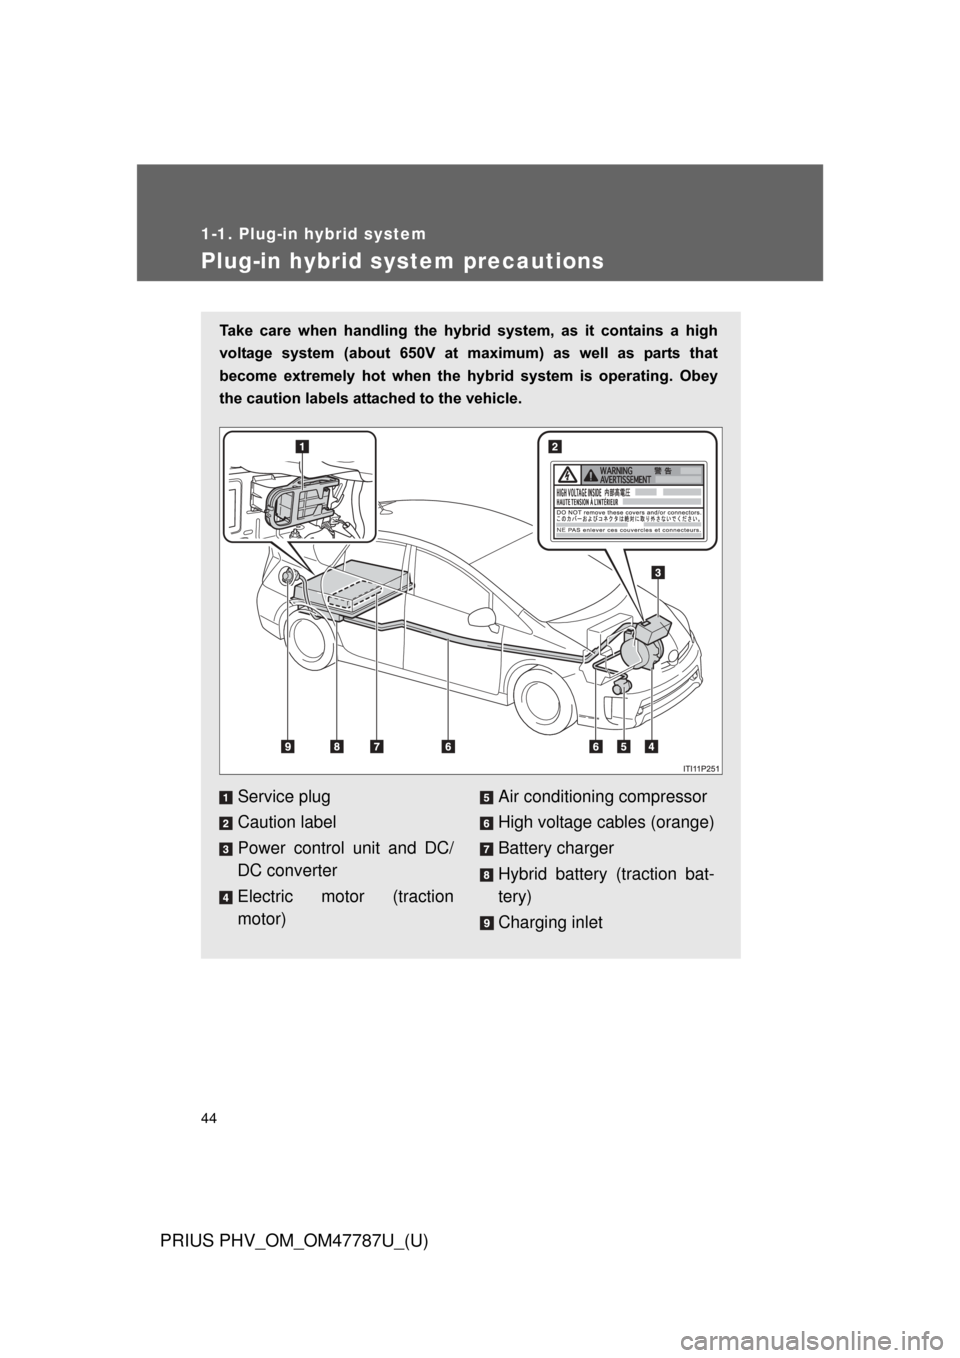 TOYOTA PRIUS PLUG-IN HYBRID 2013 1.G User Guide 44
1-1. Plug-in hybrid system
PRIUS PHV_OM_OM47787U_(U)
Plug-in hybrid system precautions
Take  care  when  handling  the  hybrid  system,  as  it  contains  a  high
voltage  system  (about  650V  at 